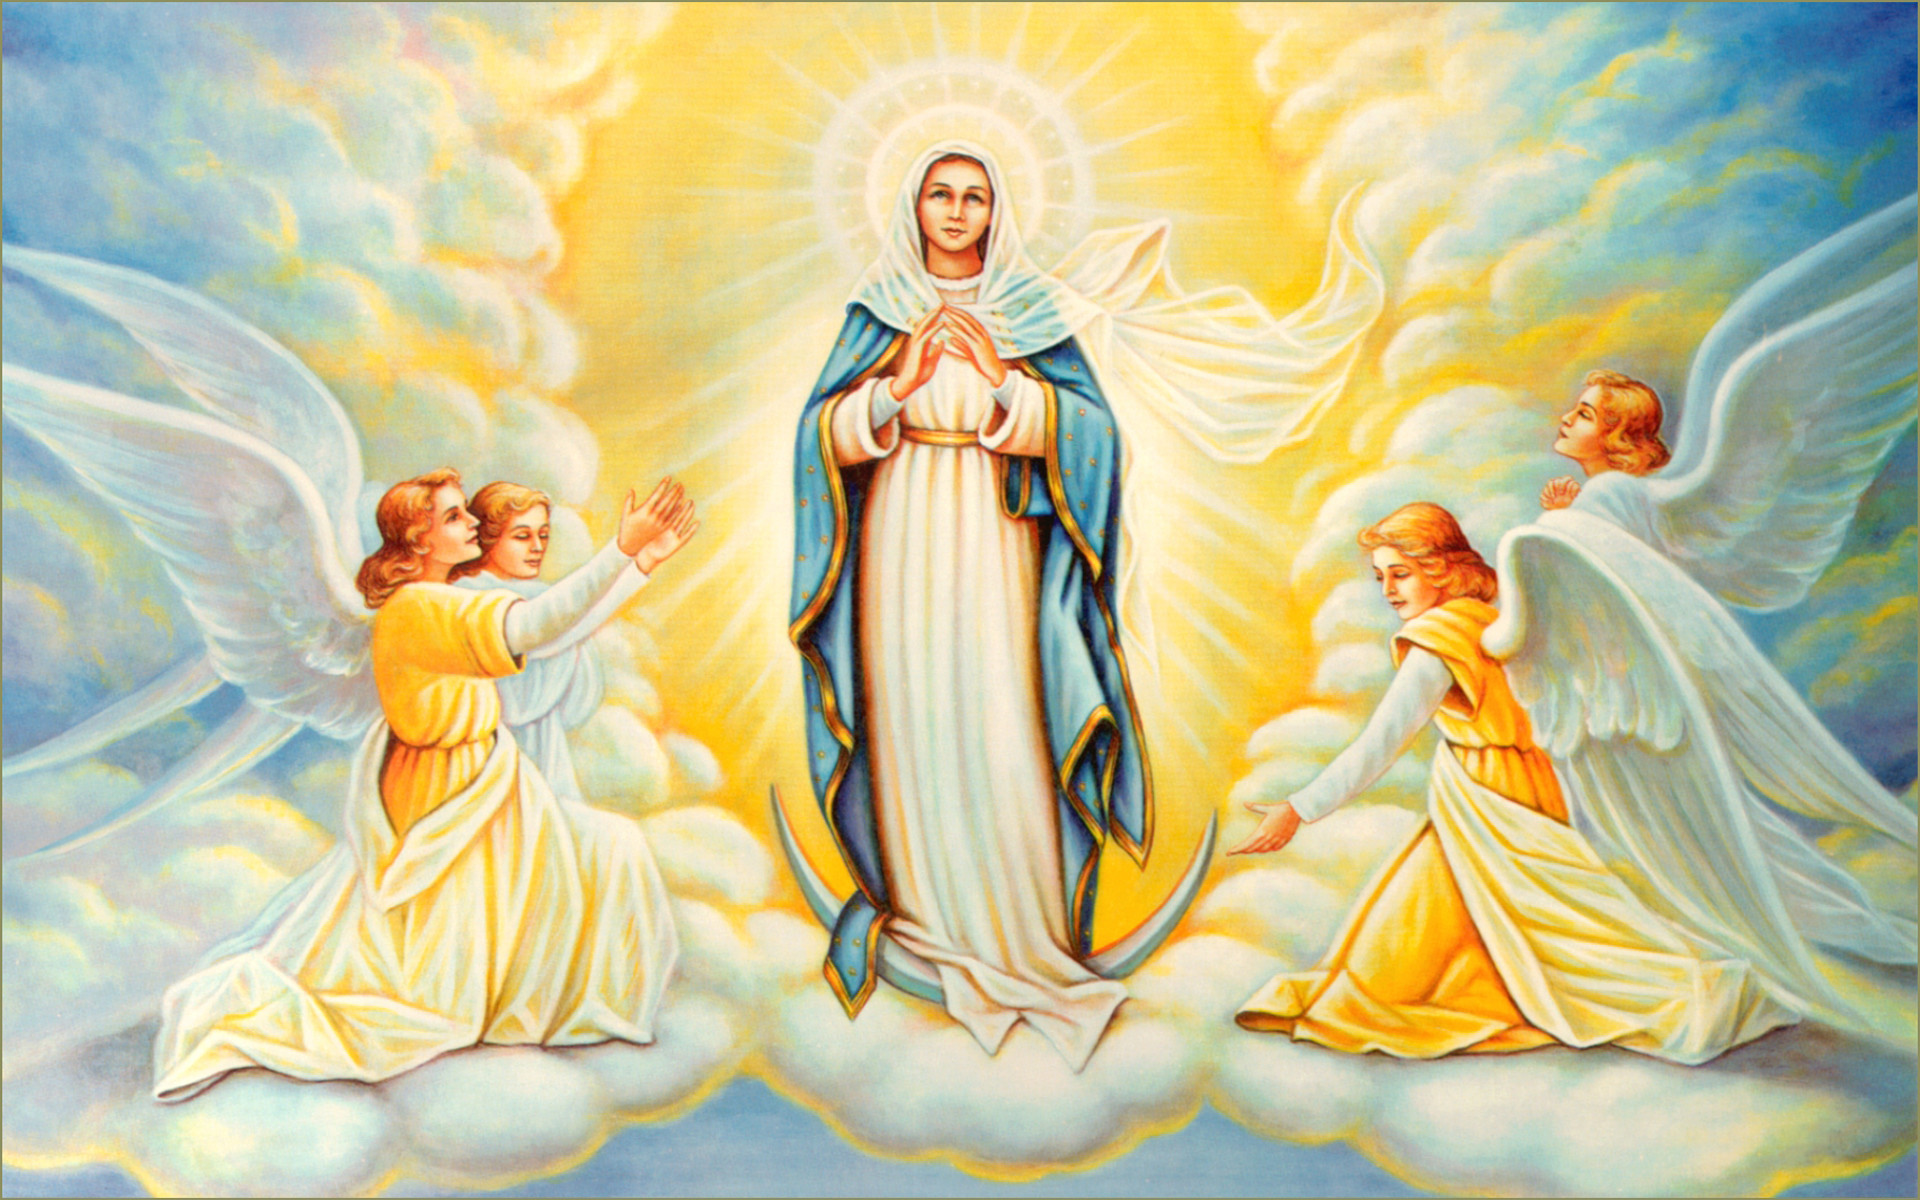 Virgin Mary Wallpapers